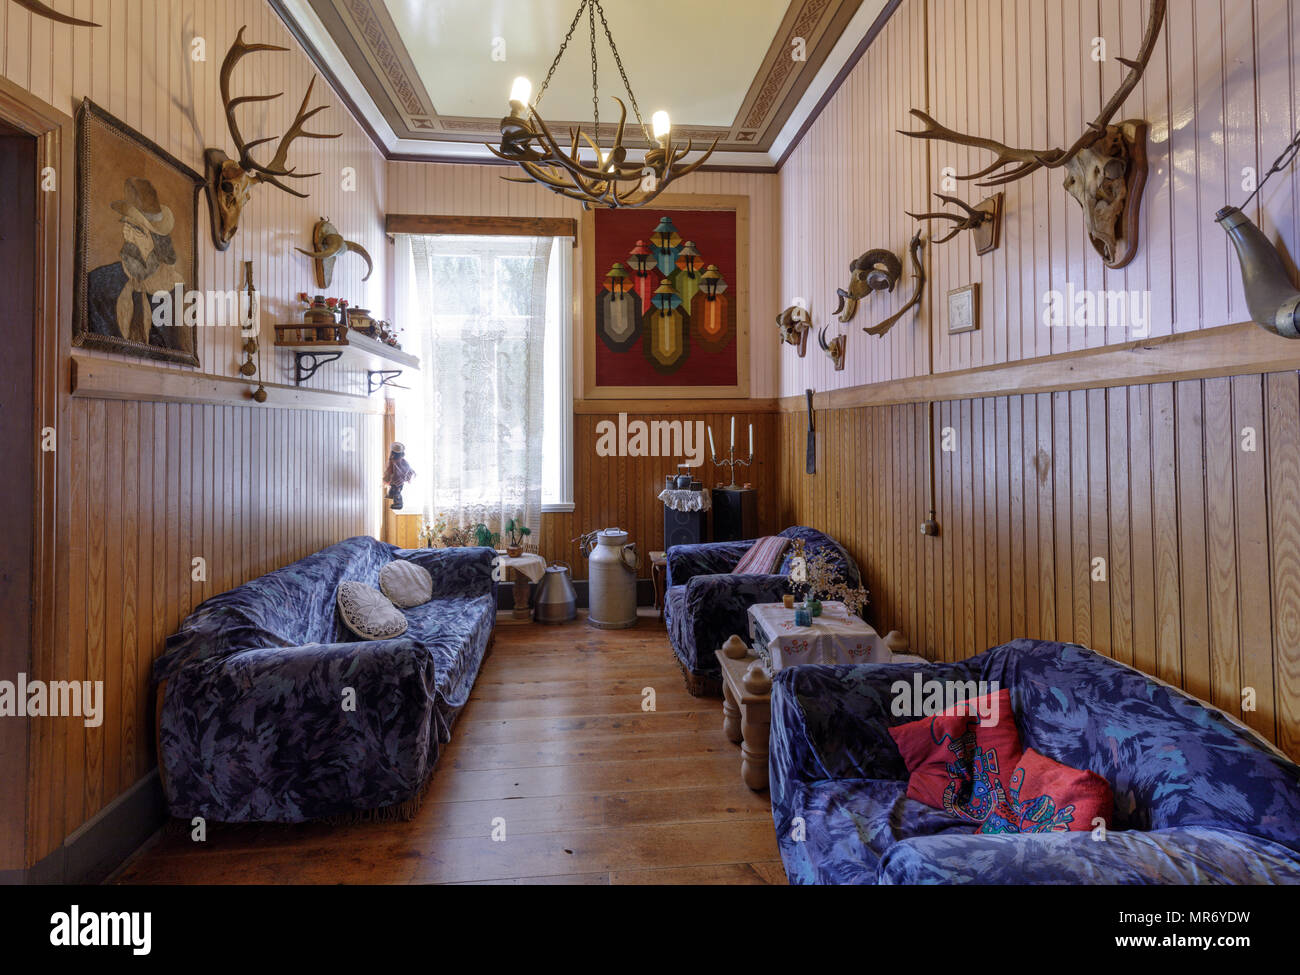 Puerto Varas, Lakes District, Chile: Interior of an historic home. Stock Photo